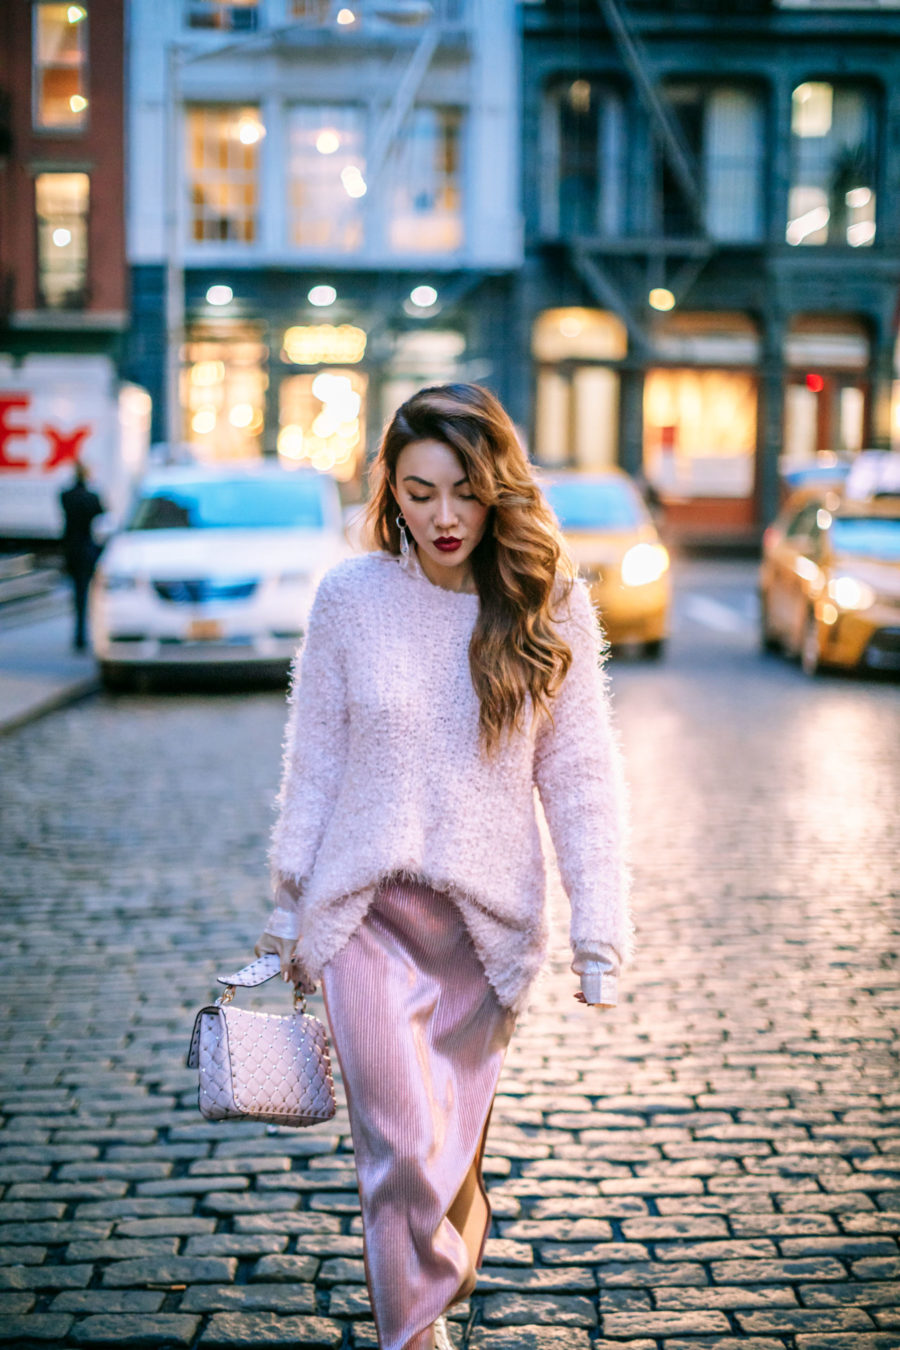 Best NYC Date night ideas, valentine's day outfit ideas - Pink Monochrome Outfit // Notjessfashion.com